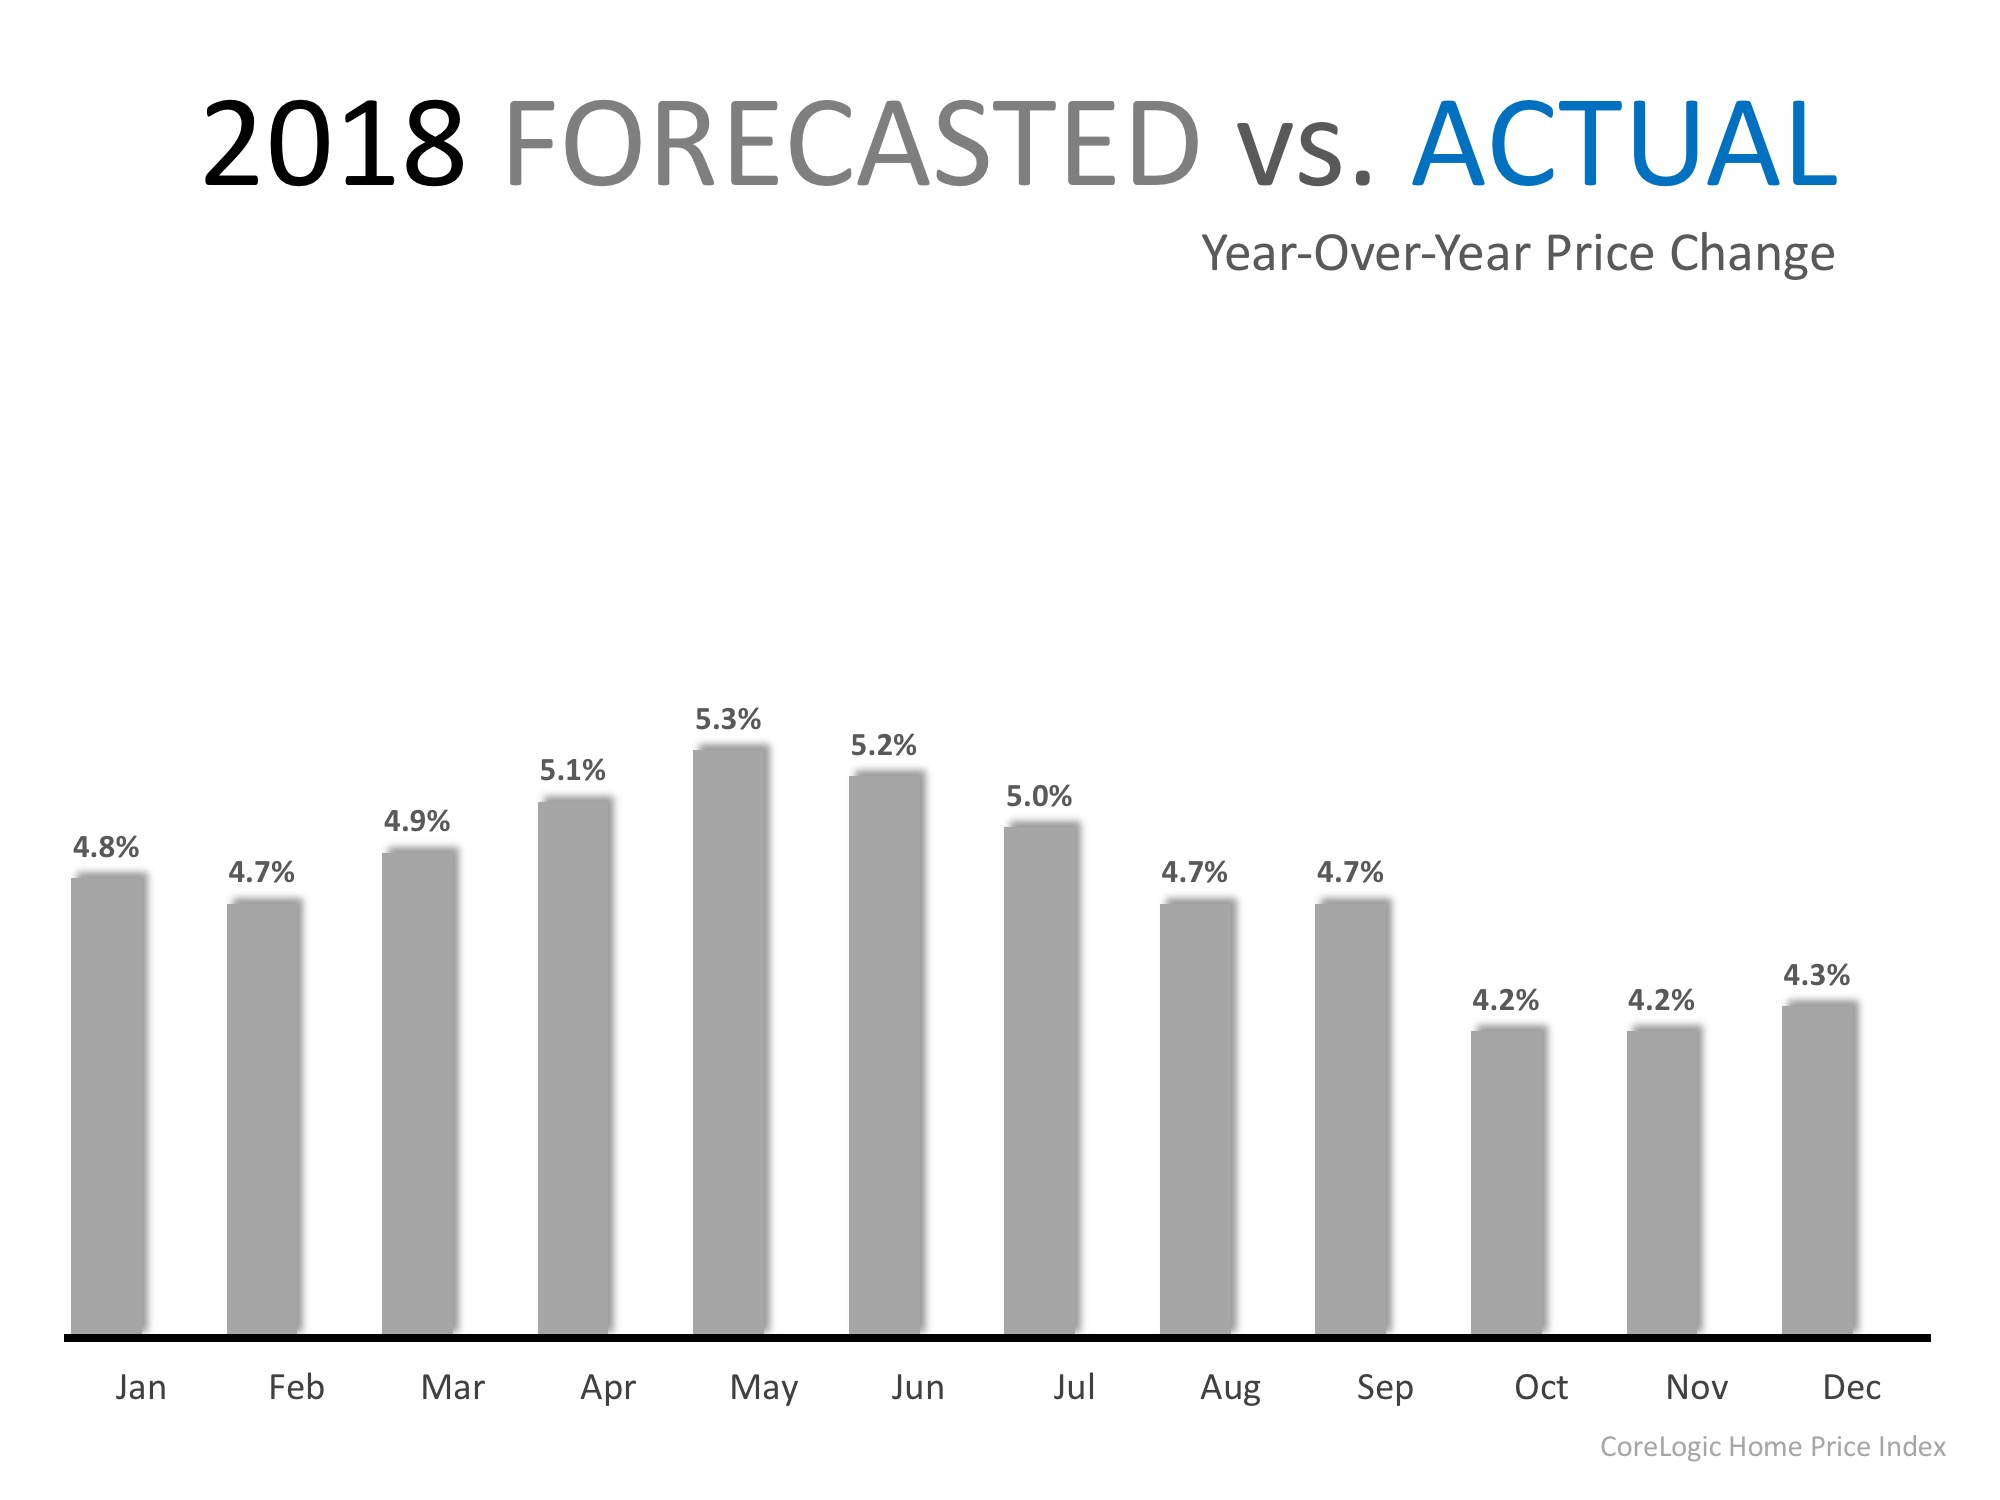 Home Prices Have Appreciated 6.9% in 2018 | Simplifying The Market